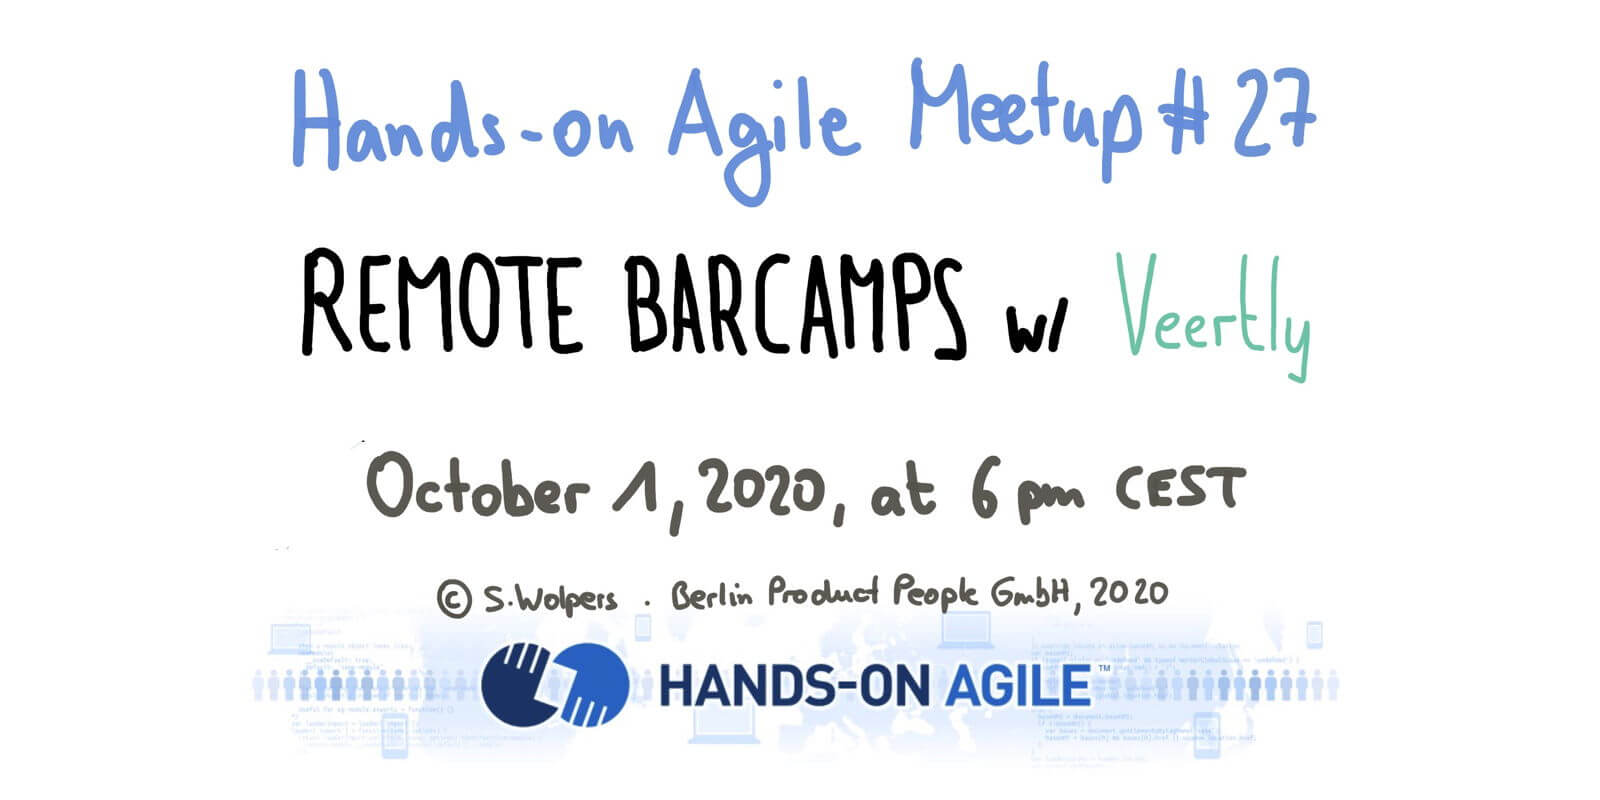 🖥 Hands-on Agile #27: Virtuelle Open Space Events mit Veertly — Berlin Product People GmbH